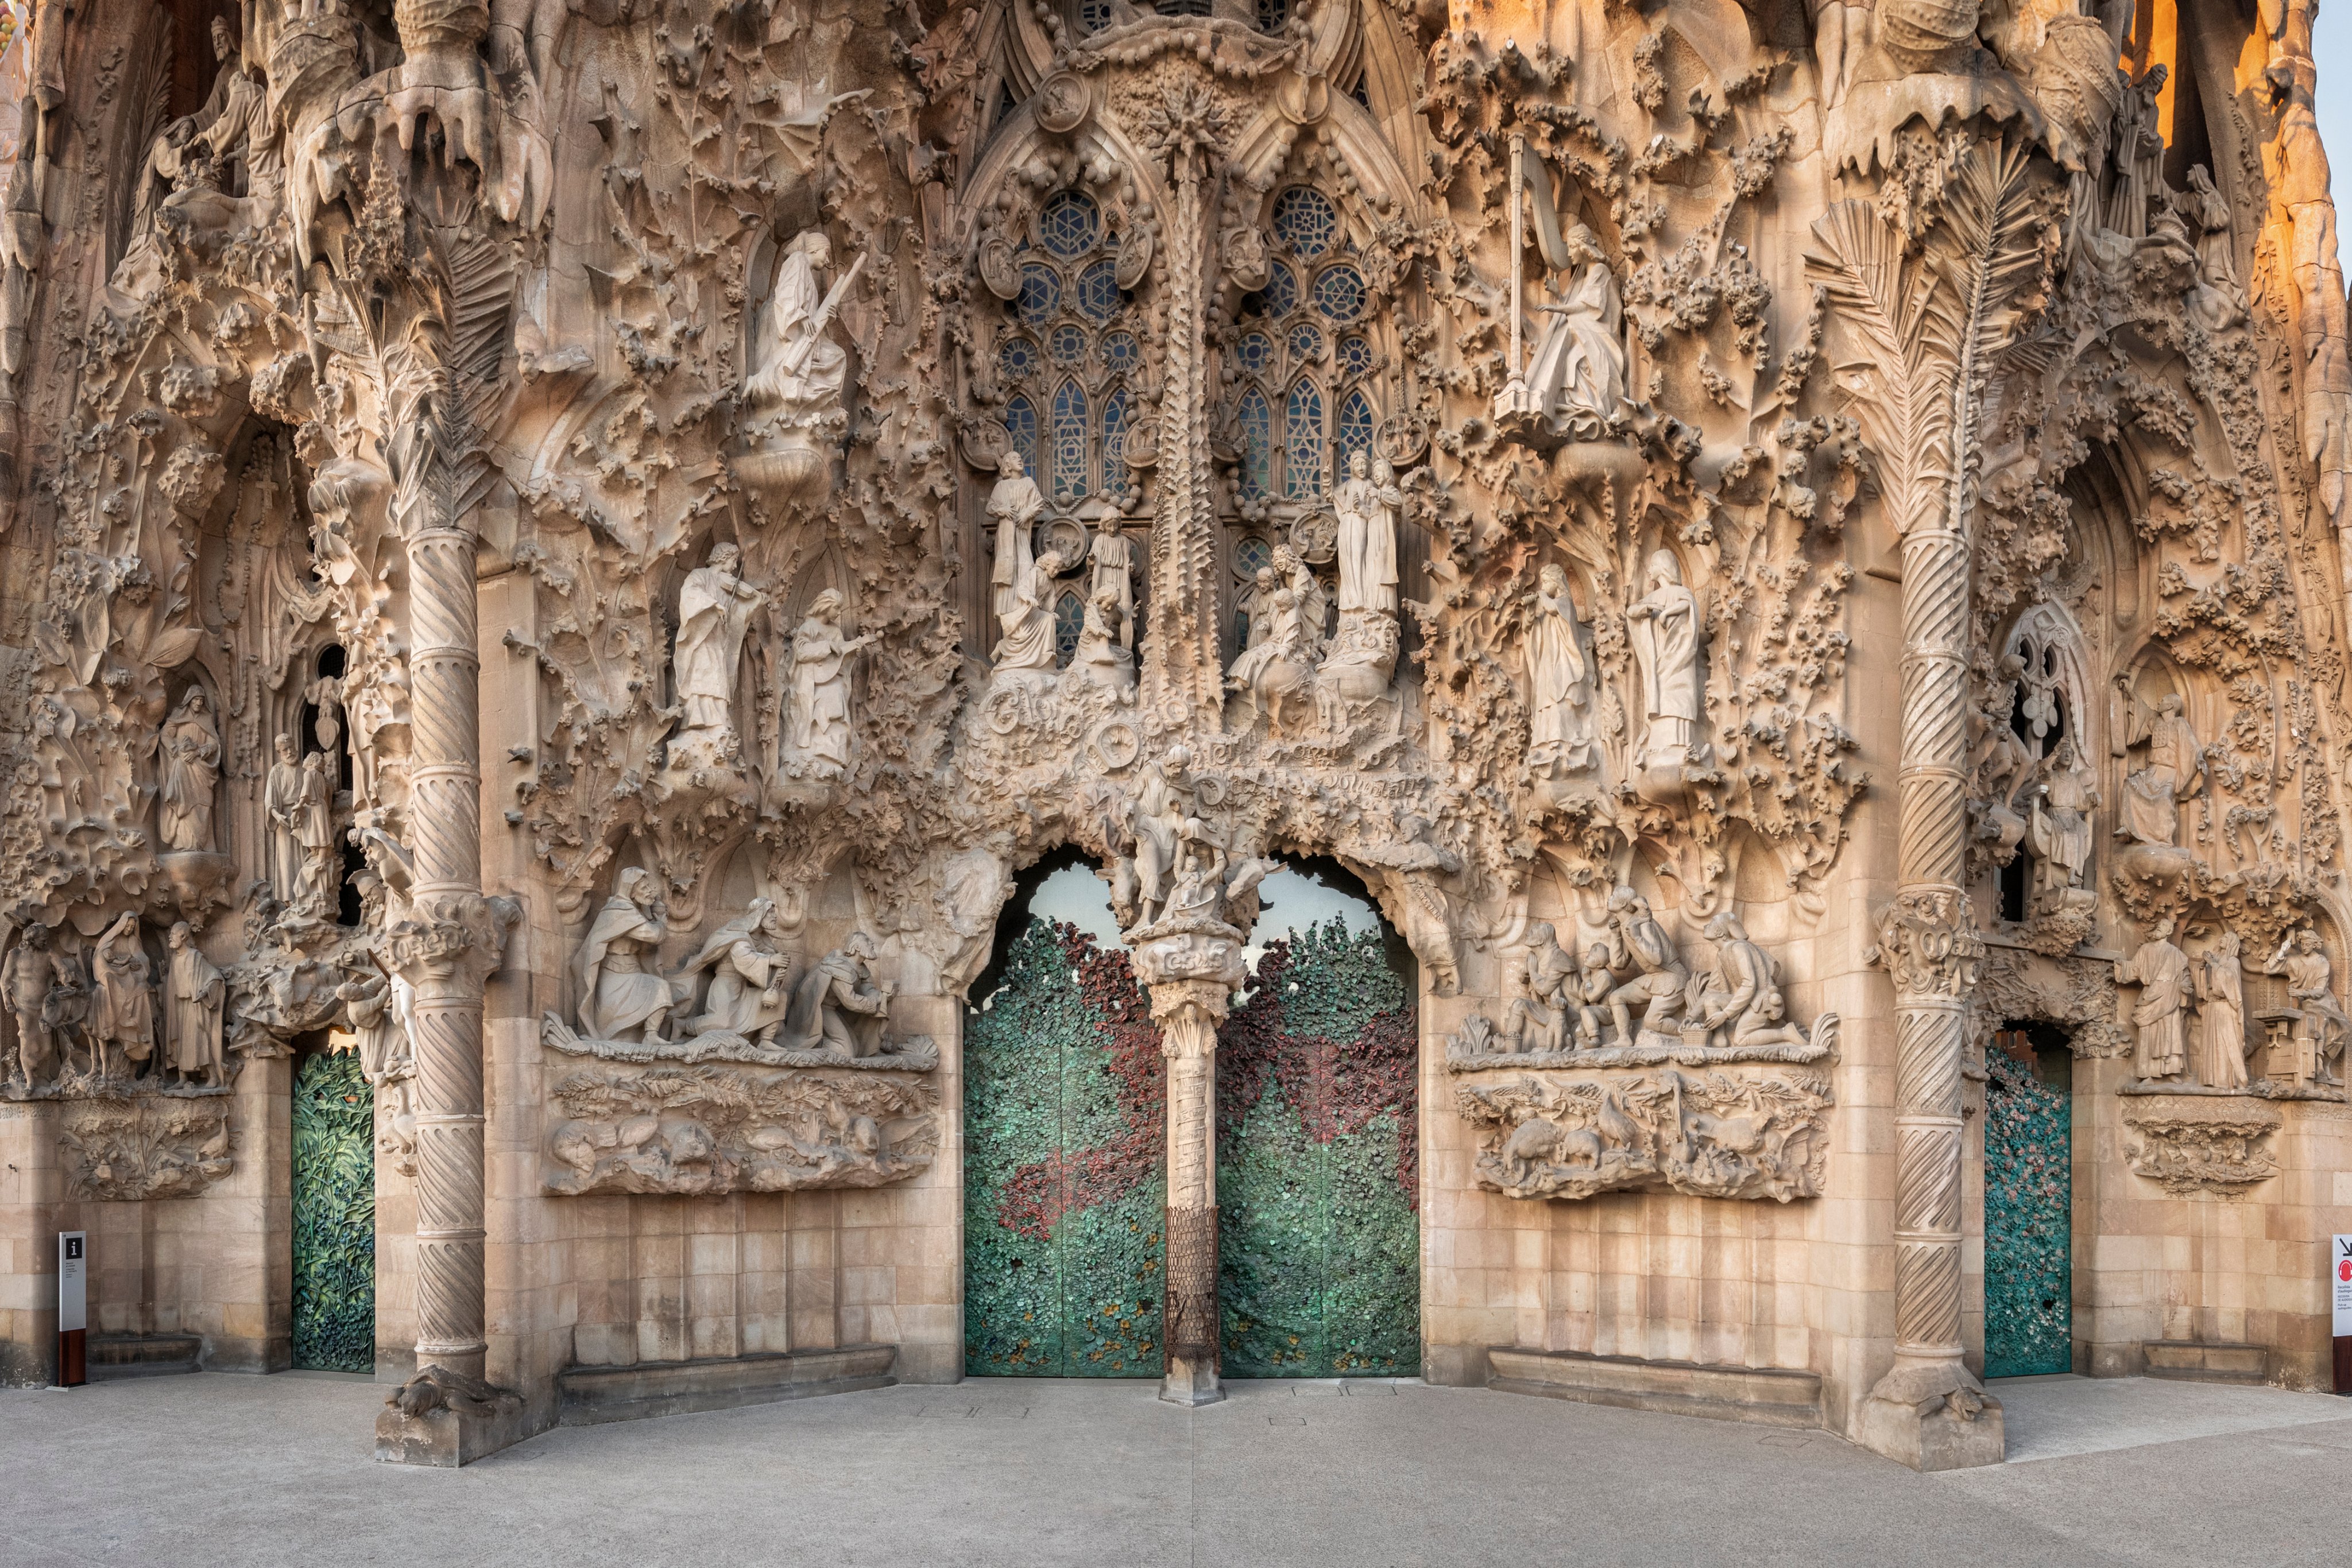 La Sagrada Família on Twitter: "The structure of the Nativity façade shows that Gaudí gave each architectural element meaning. Among others, it has three portals, one for each member of the Holy